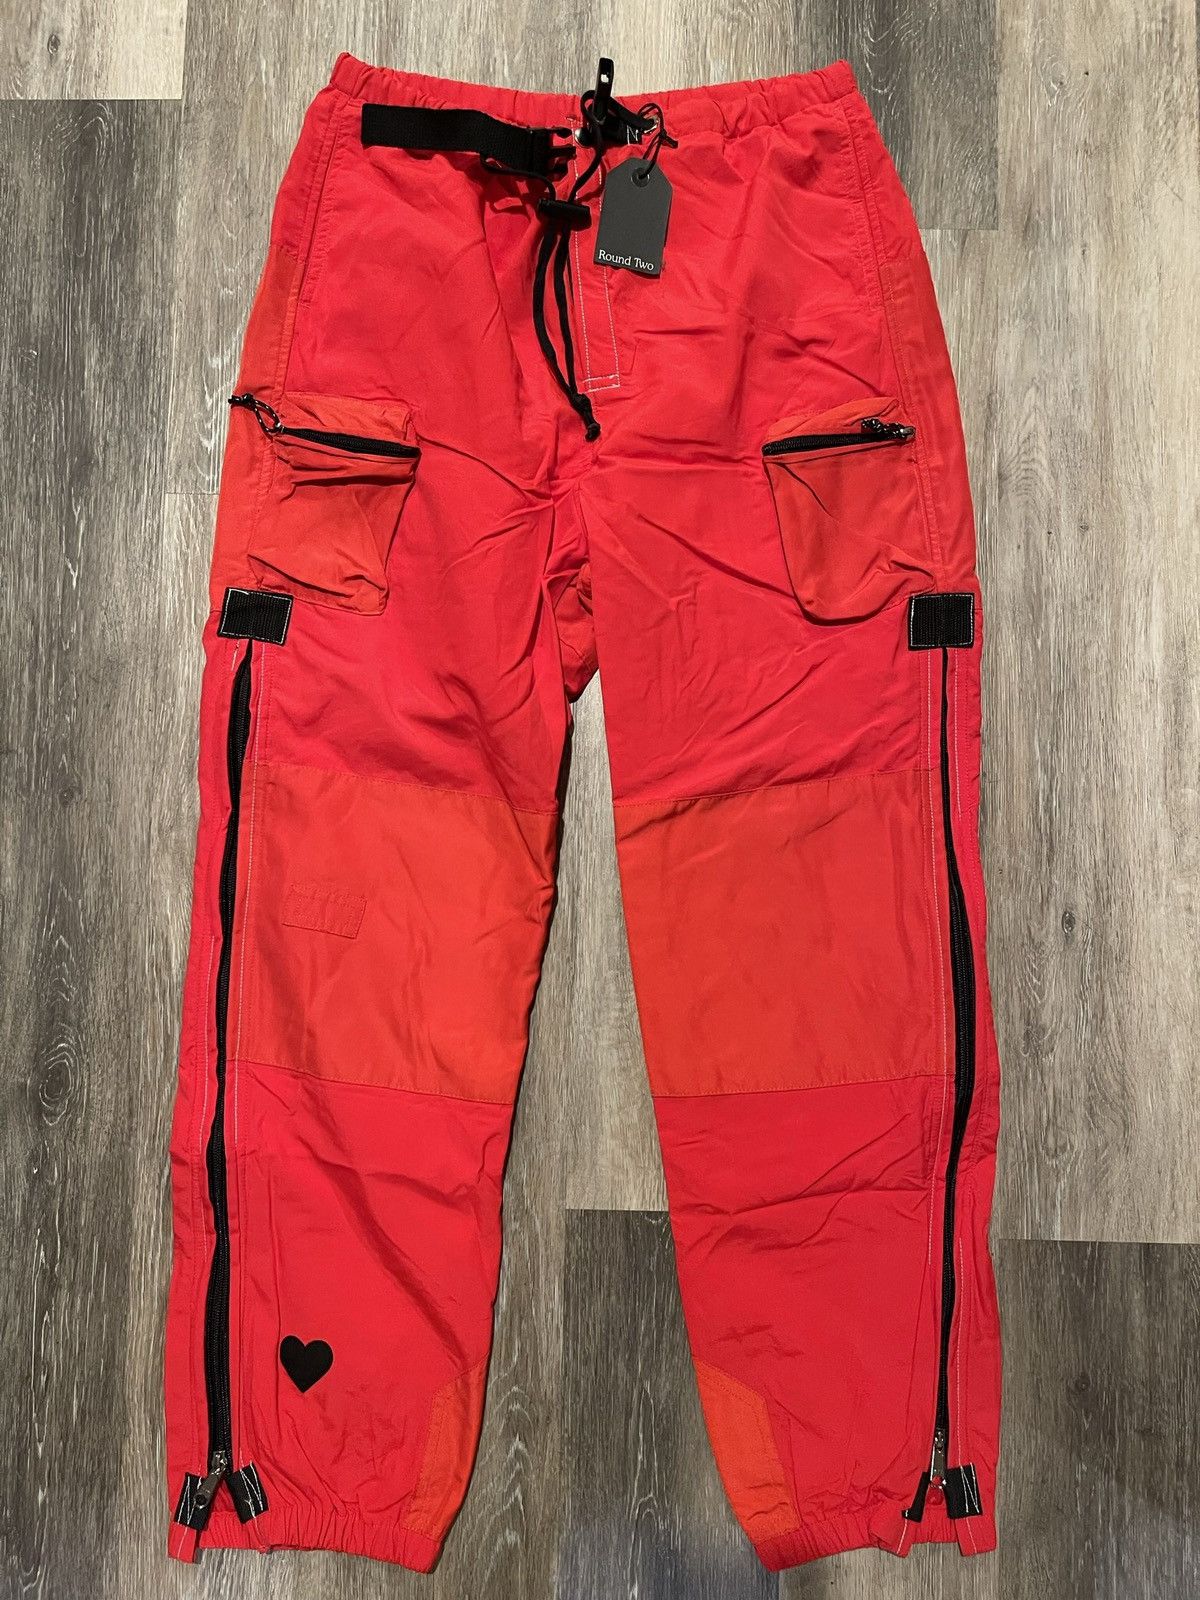 Round Two Round Two Hiking Pants | Grailed